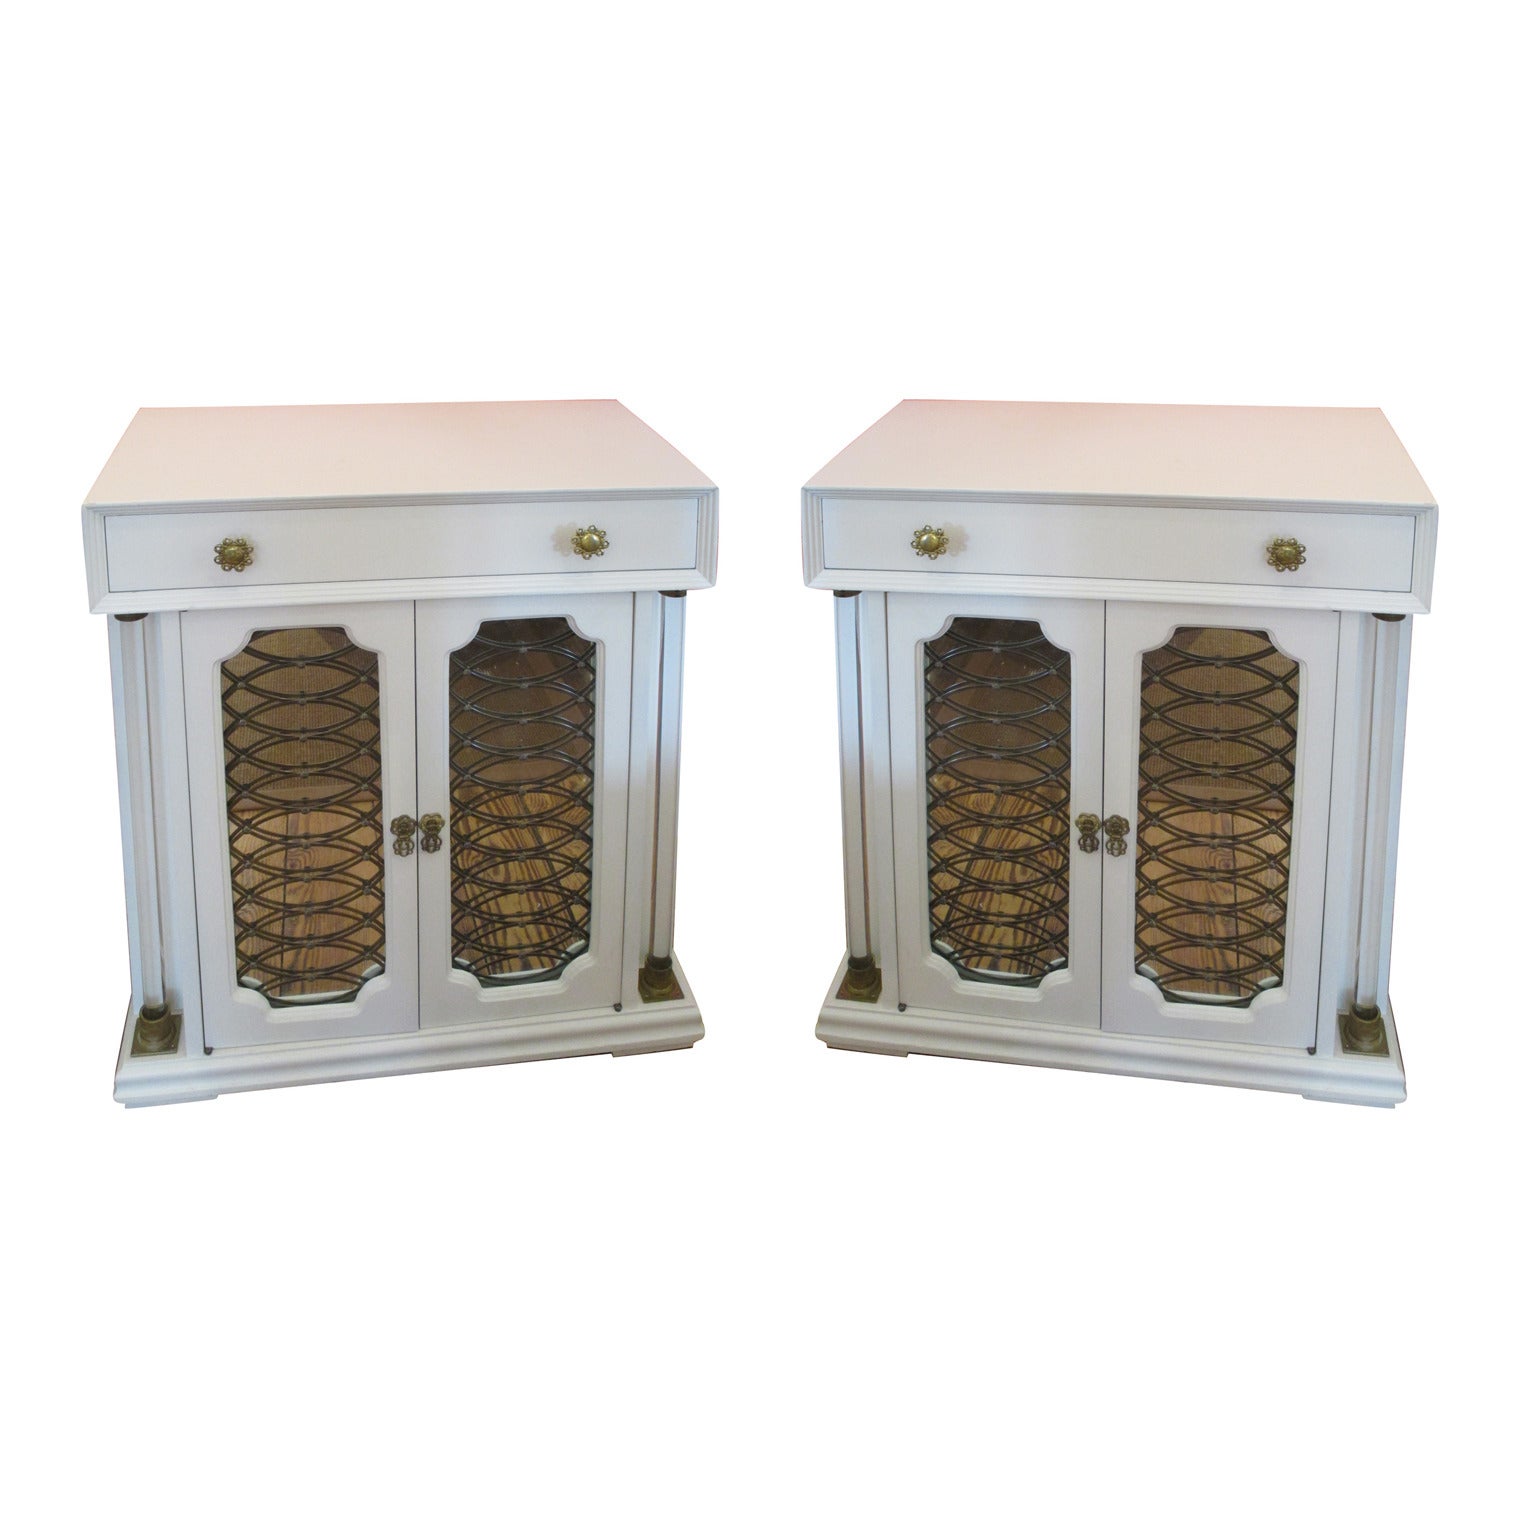 Pair of White and Mirrored Regency Style Night Stands